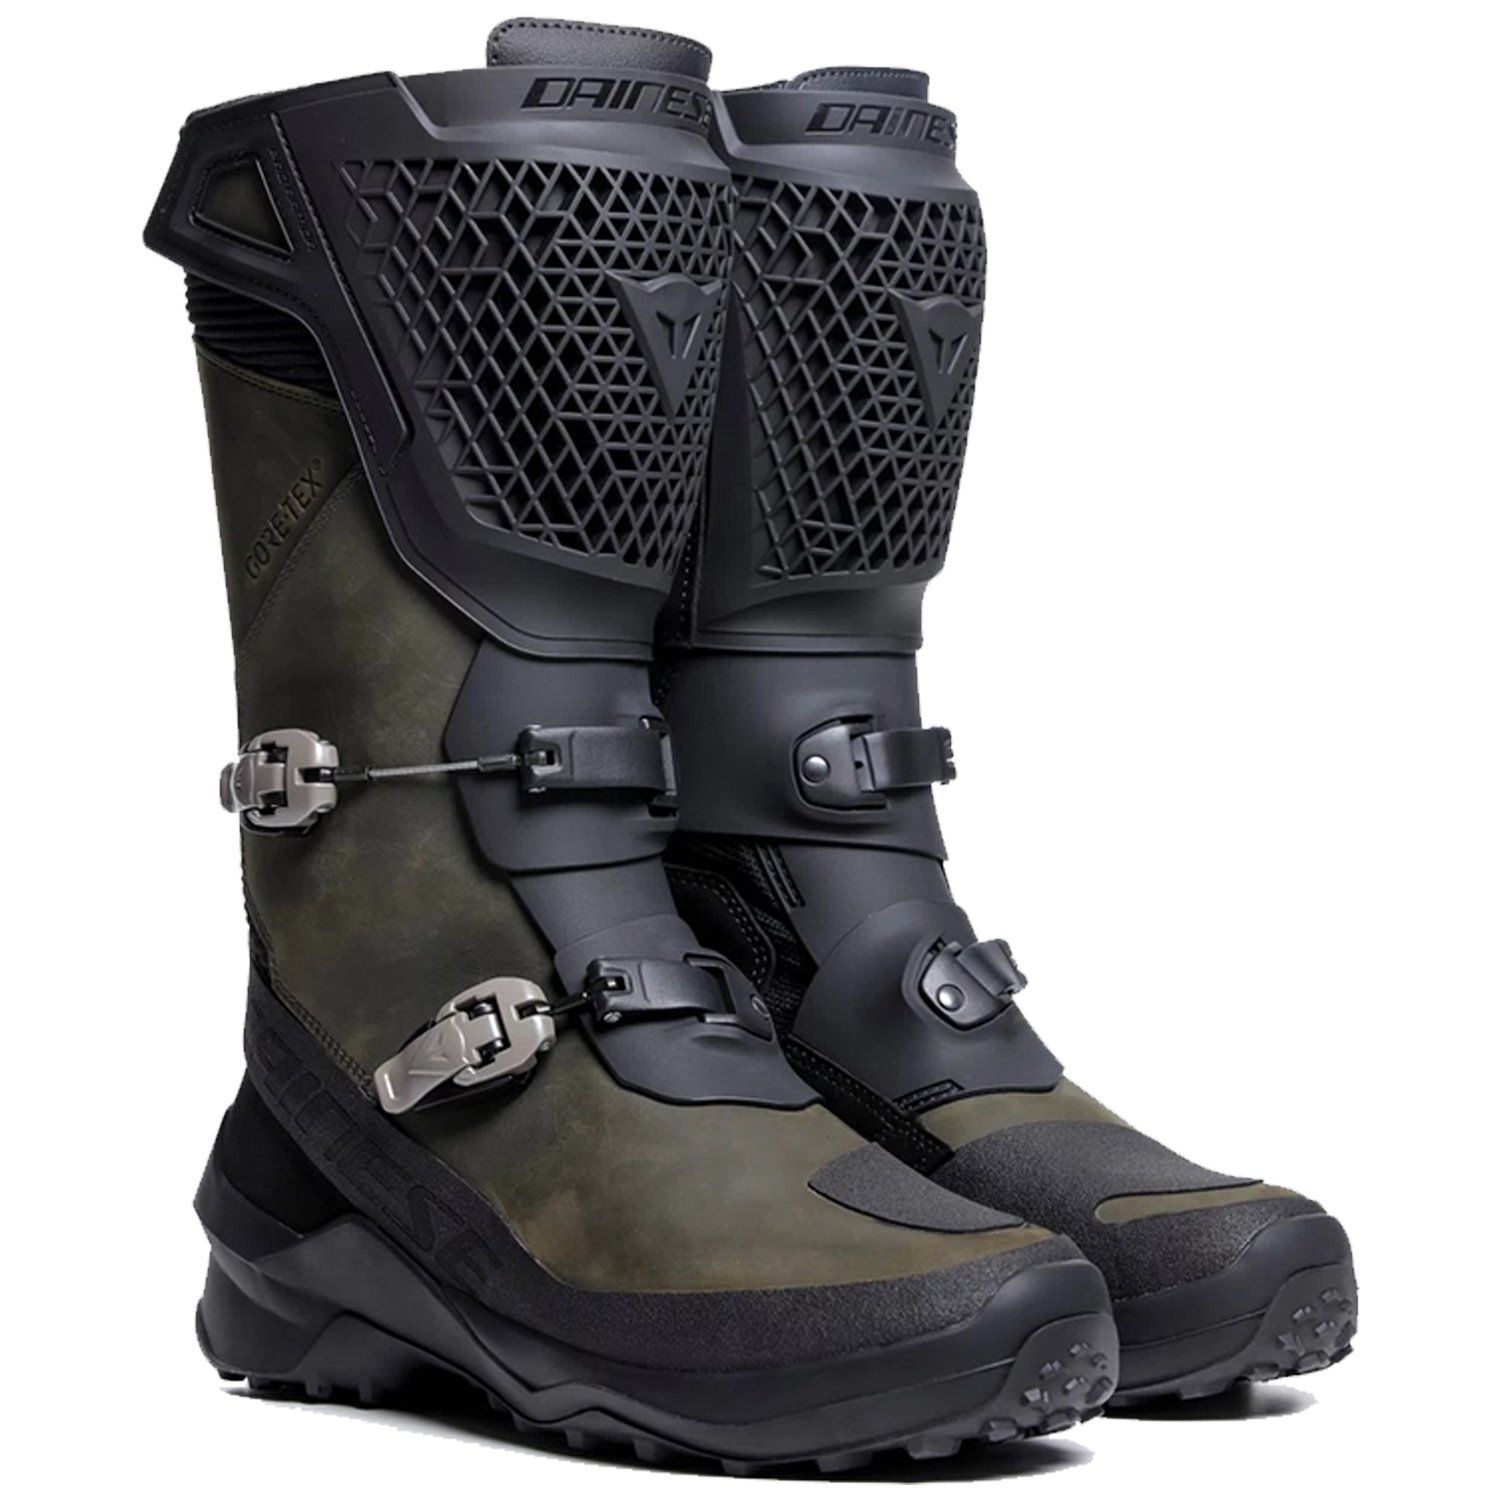 Image of Dainese Seeker Gore-Tex Boots Black Army Green Size 41 ID 8051019544490